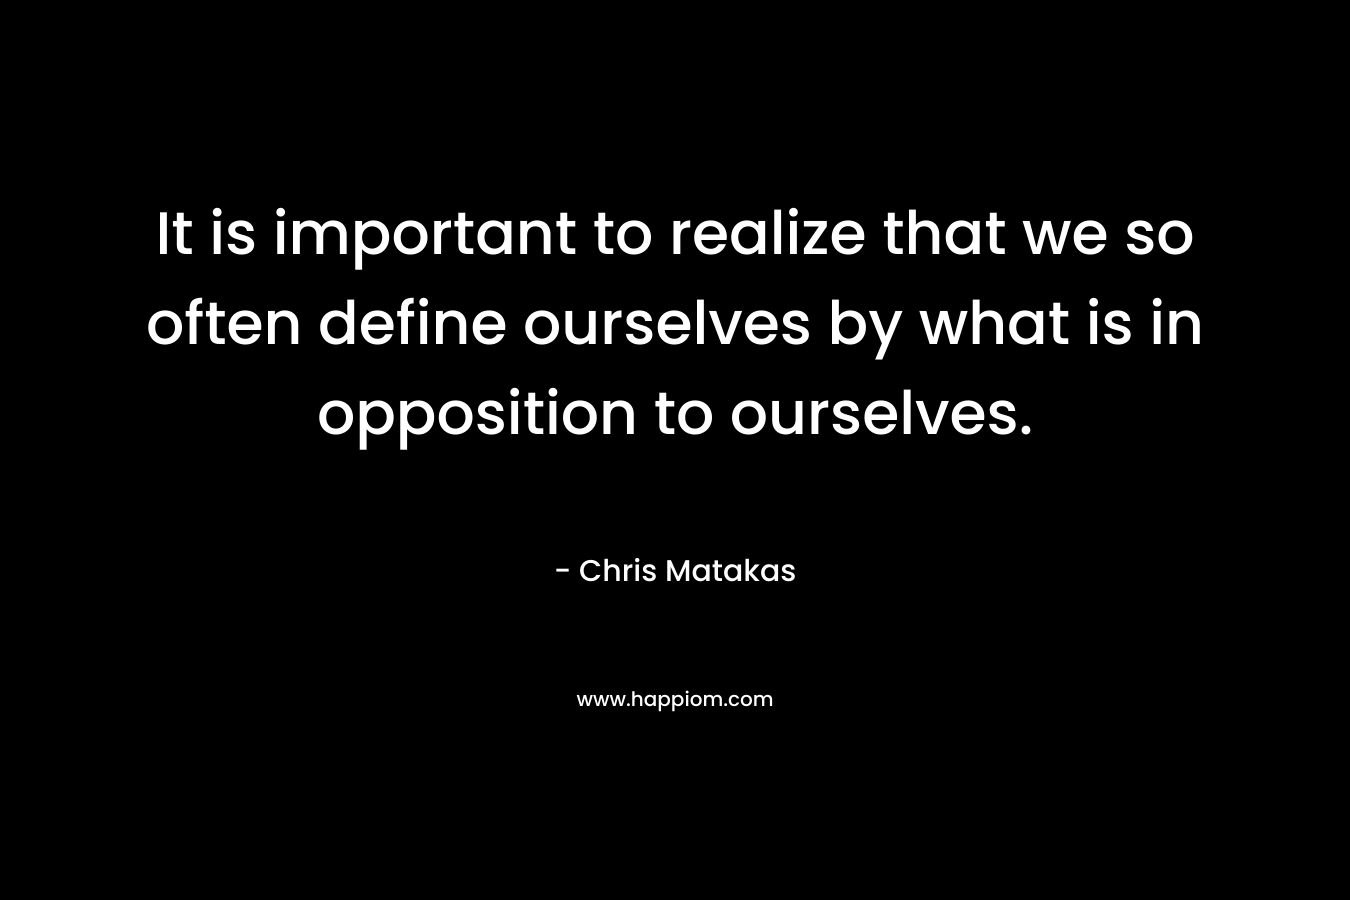 It is important to realize that we so often define ourselves by what is in opposition to ourselves.